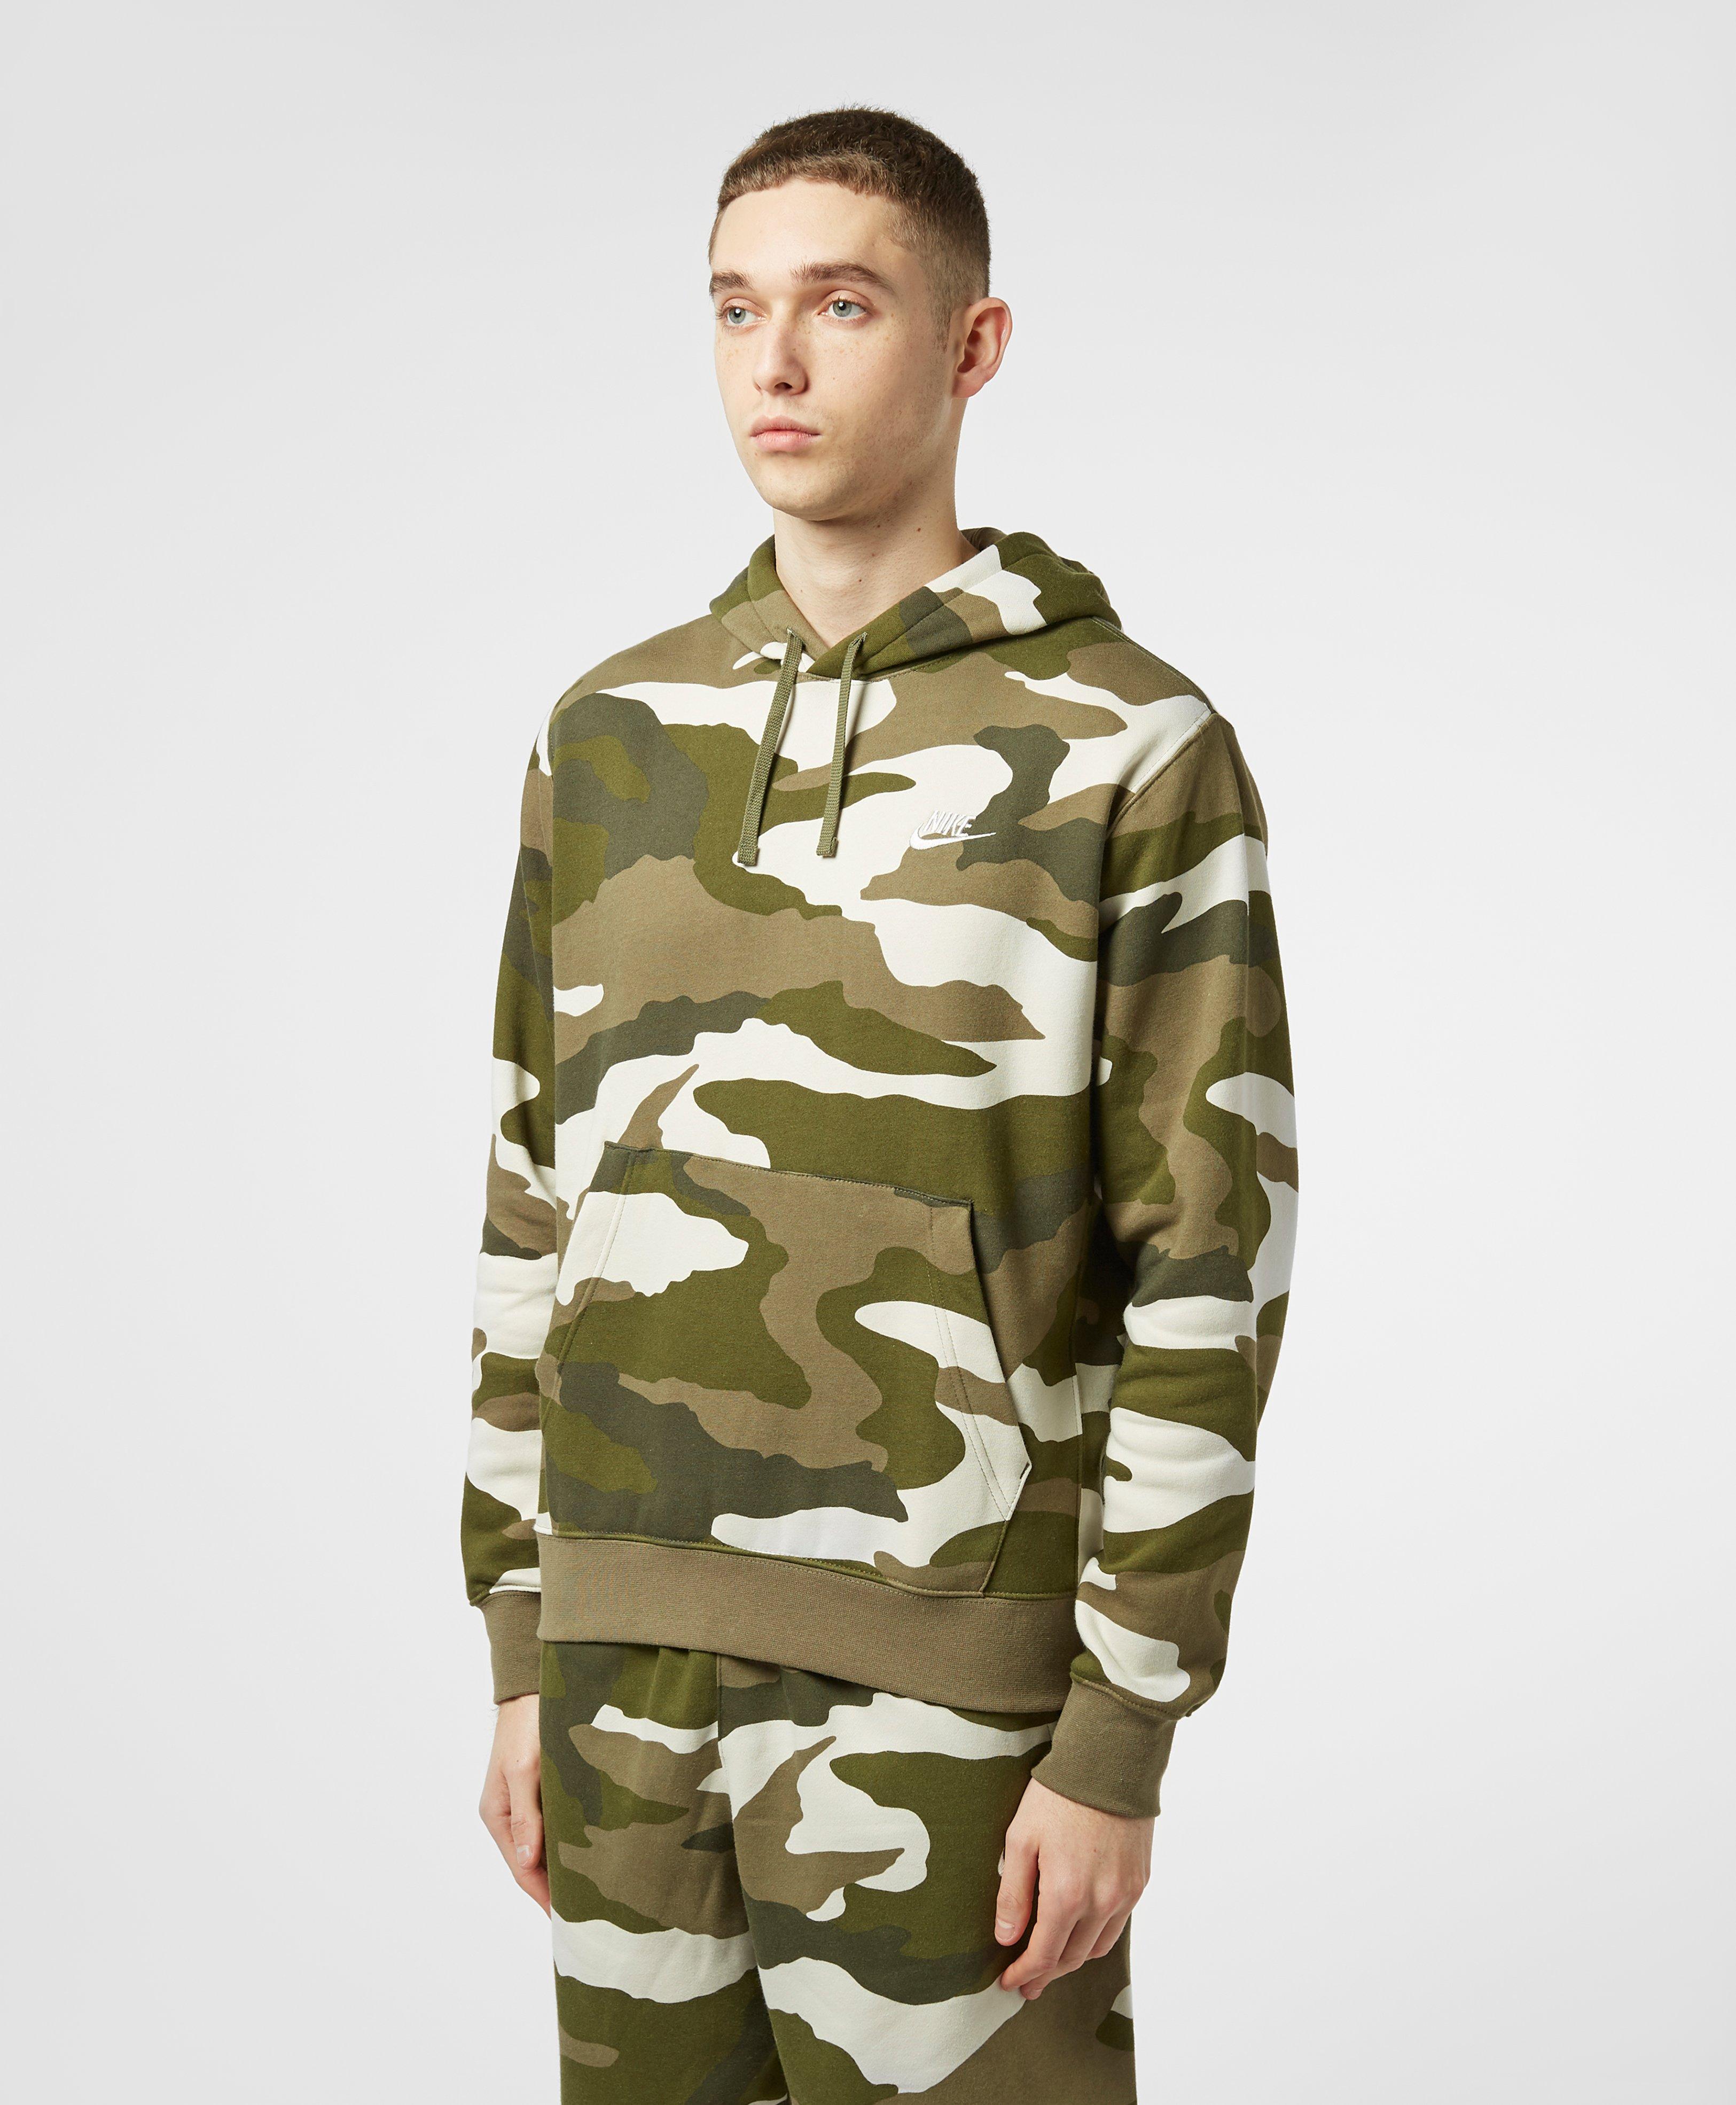 Nike Cotton Camo Overhead Hoodie in Green for Men - Lyst